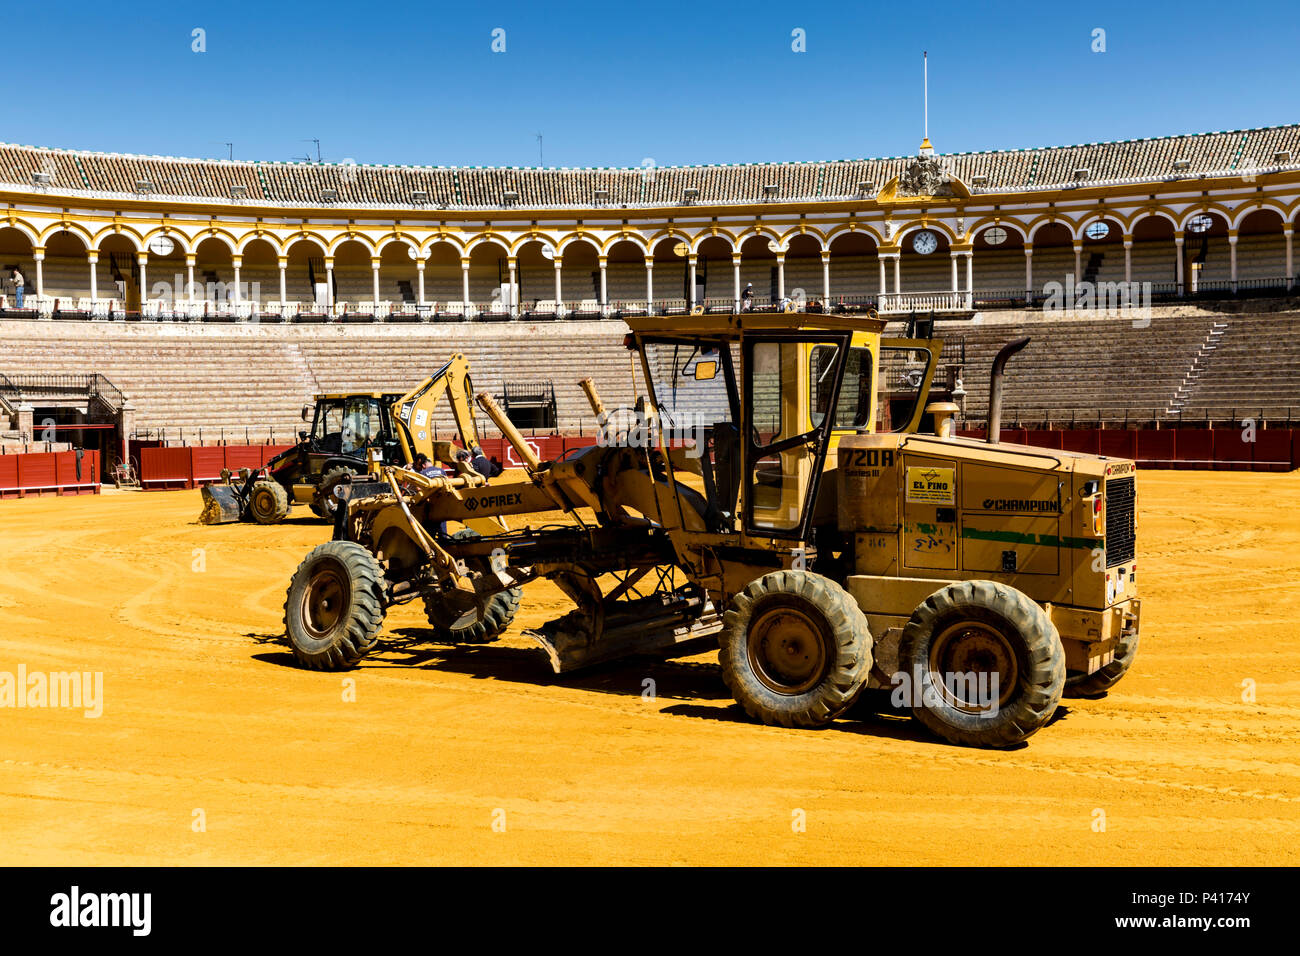 Maintenance machinery used to prepare Seville bullring for the next event day, Seville, Andalusia, Spain. Stock Photo